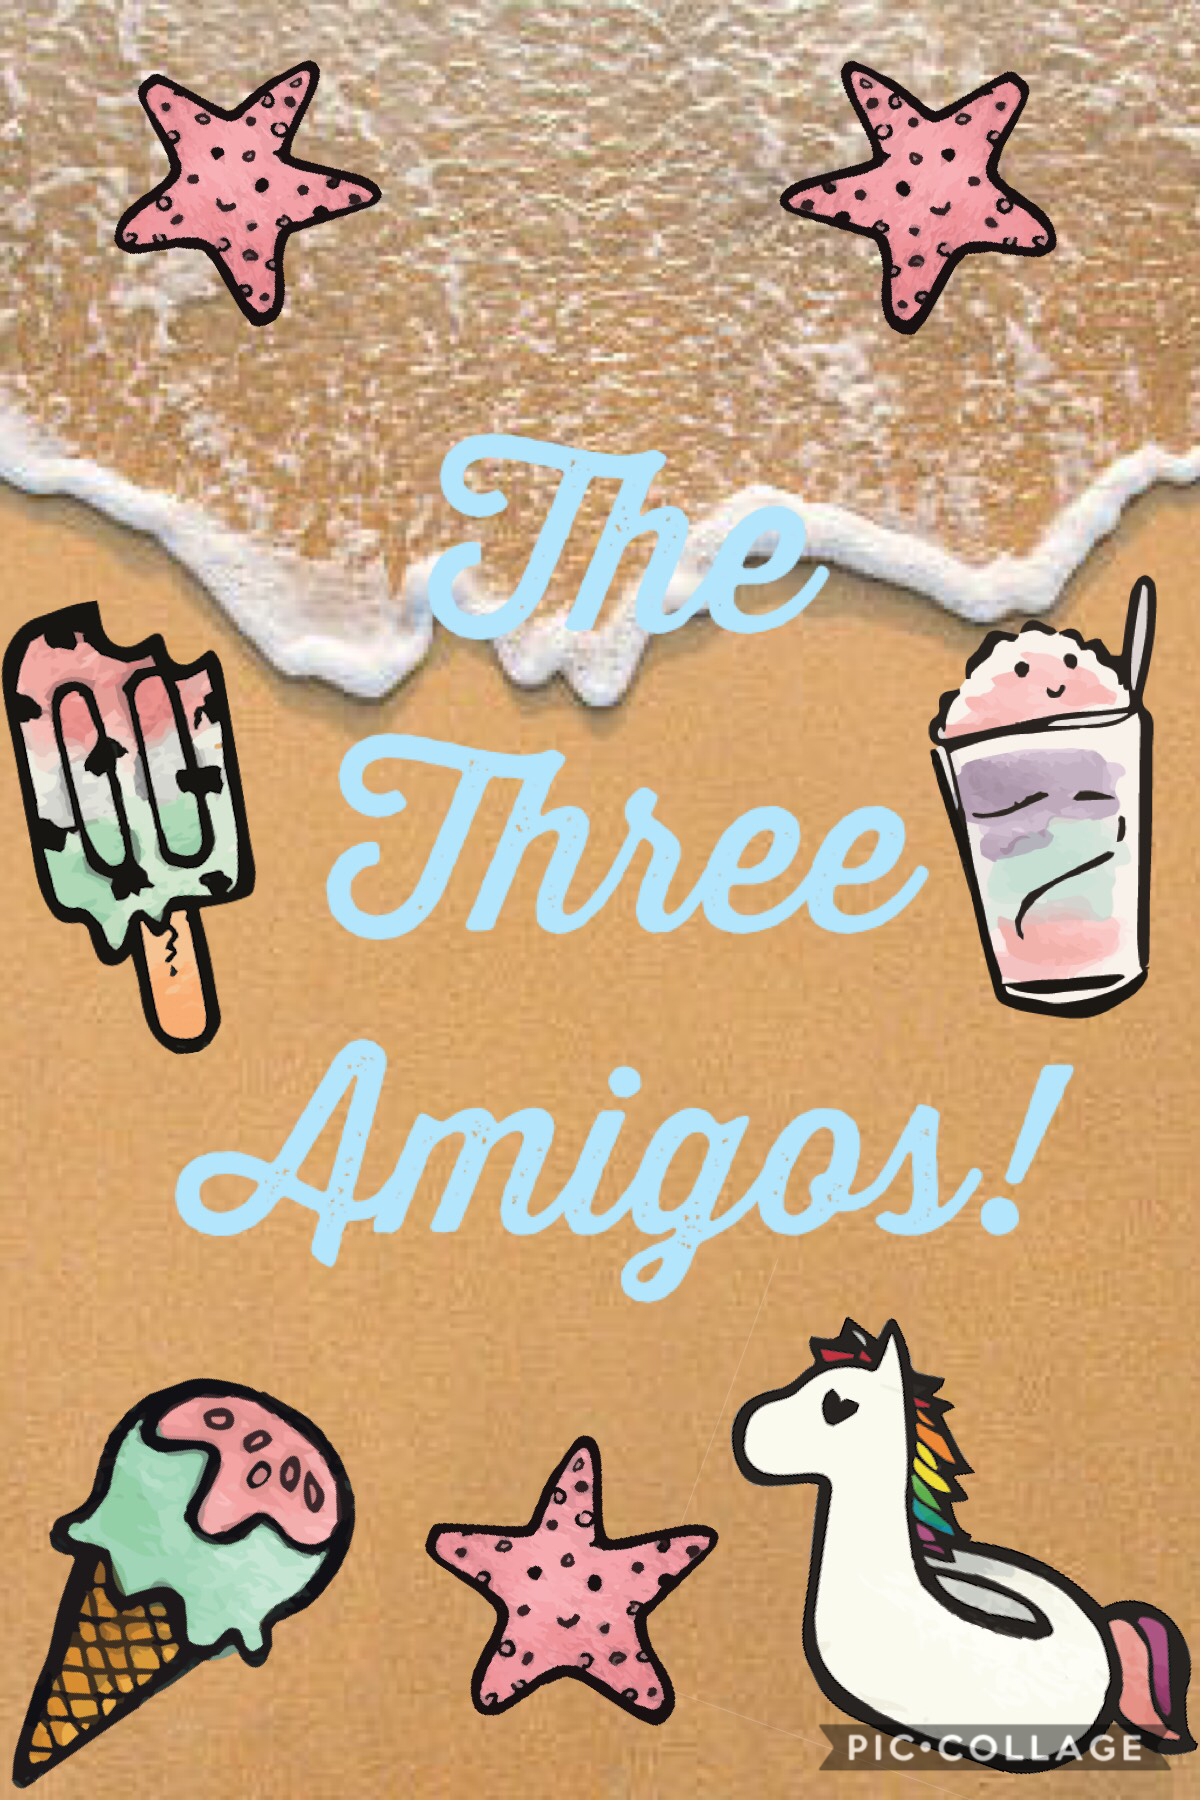 The three amigos (inspired by one of my group chats!!!)